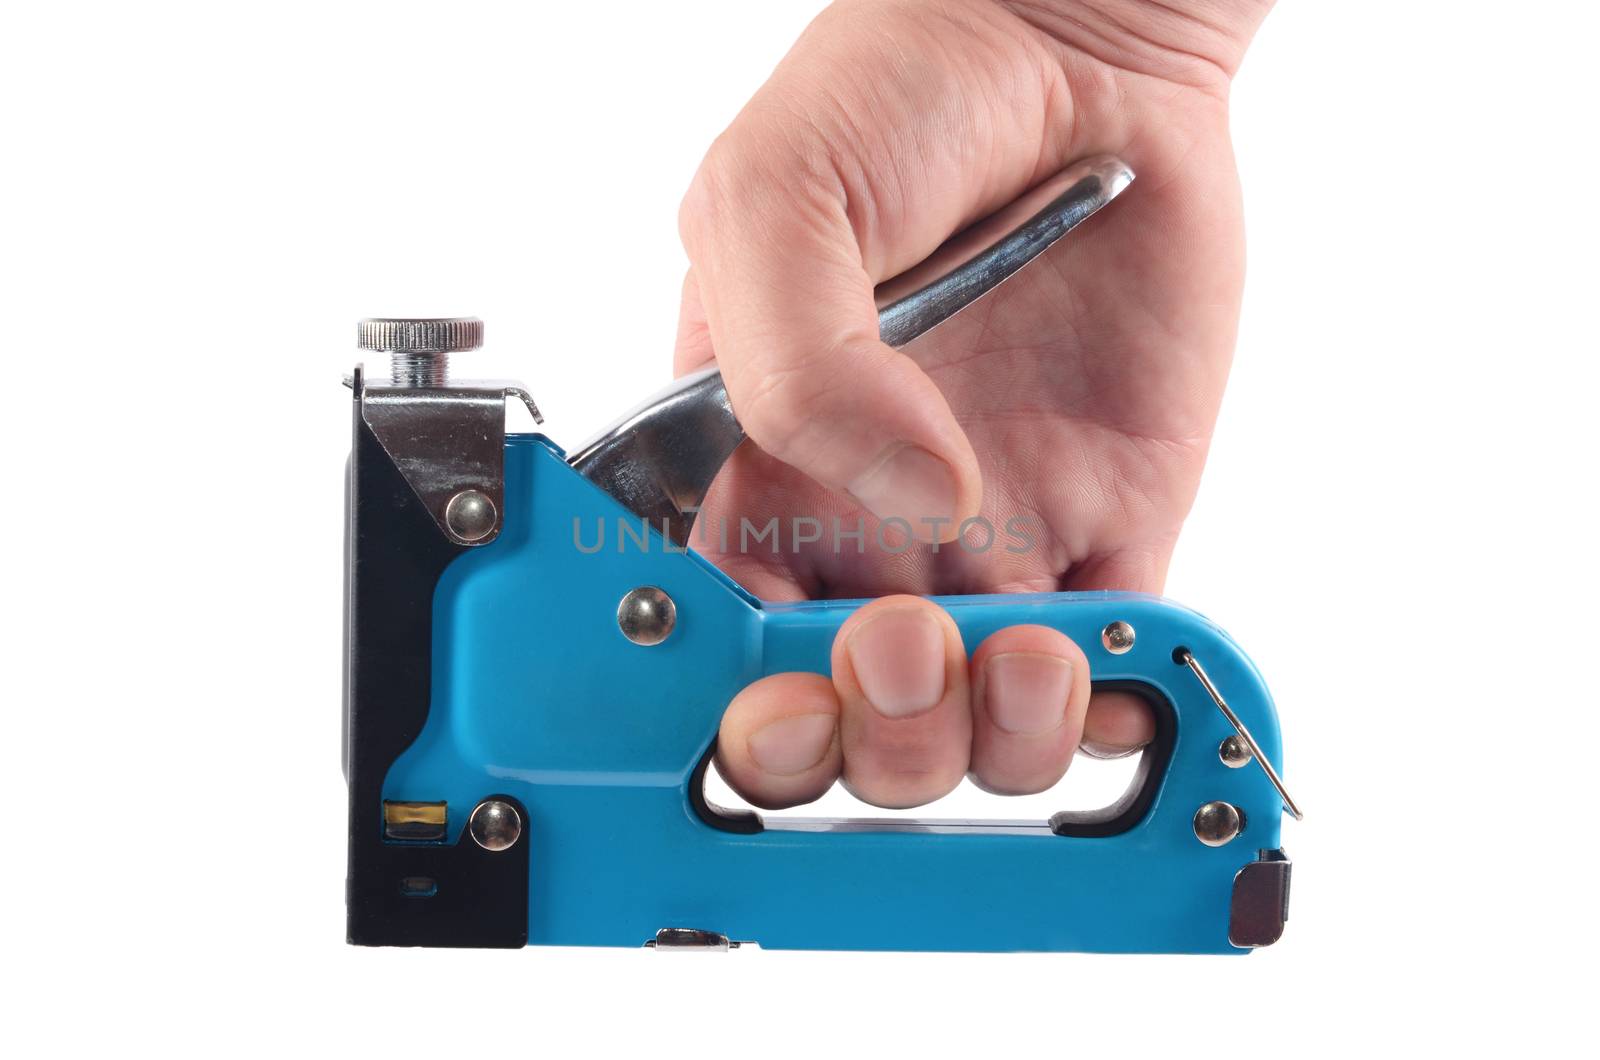 The furniture stapler in a man's hand